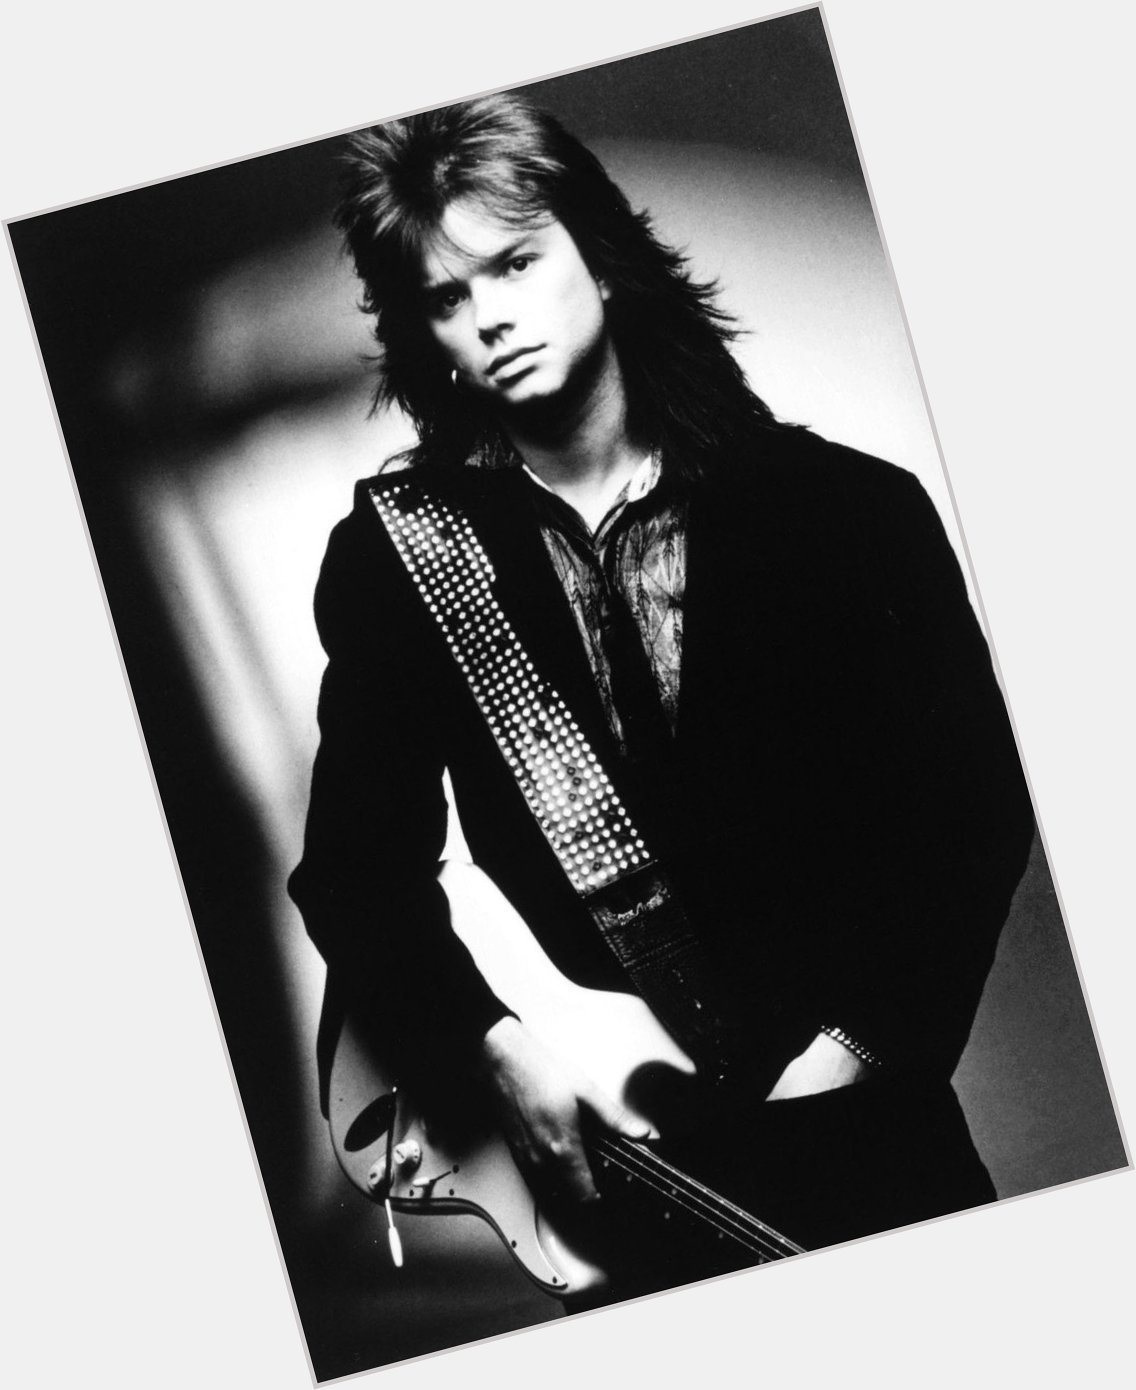 Wishing the great John Norum, lead guitarist for , a very happy 54th birthday today. 